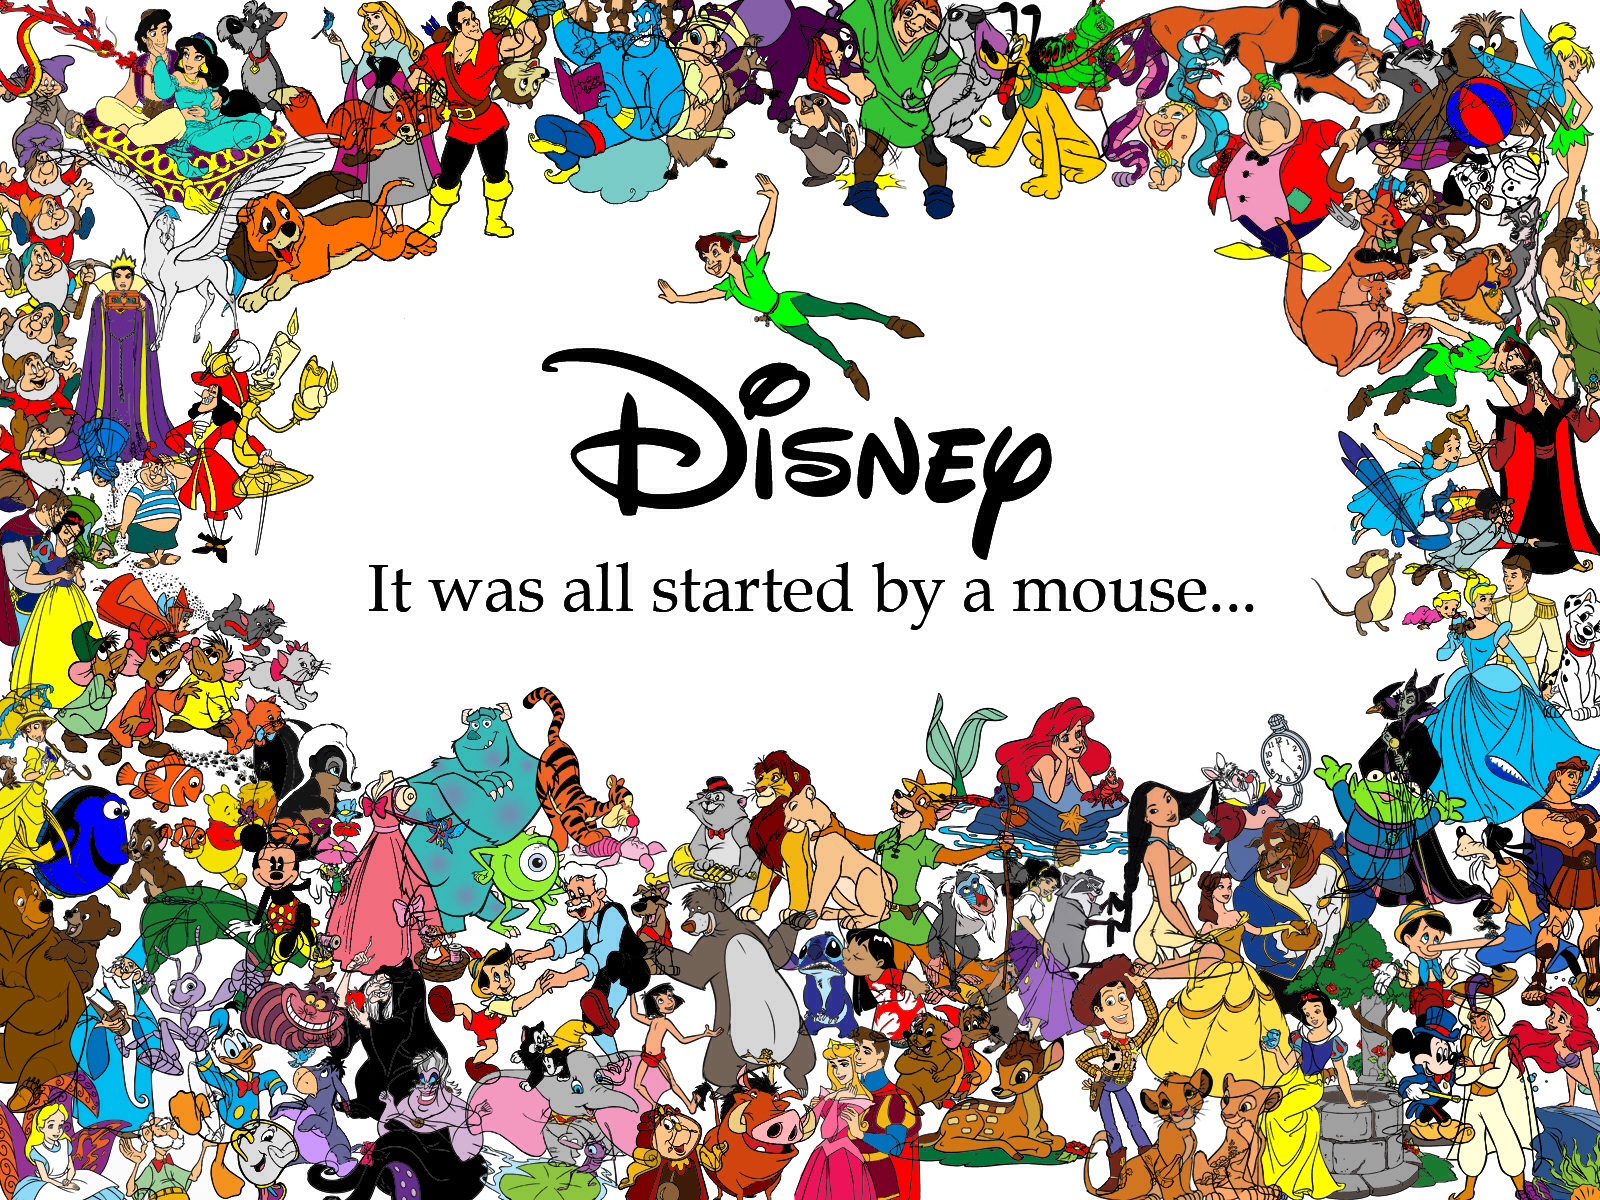 Source: http://www.playbuzz.com/jennamckenney10/which-disney-character-are-you